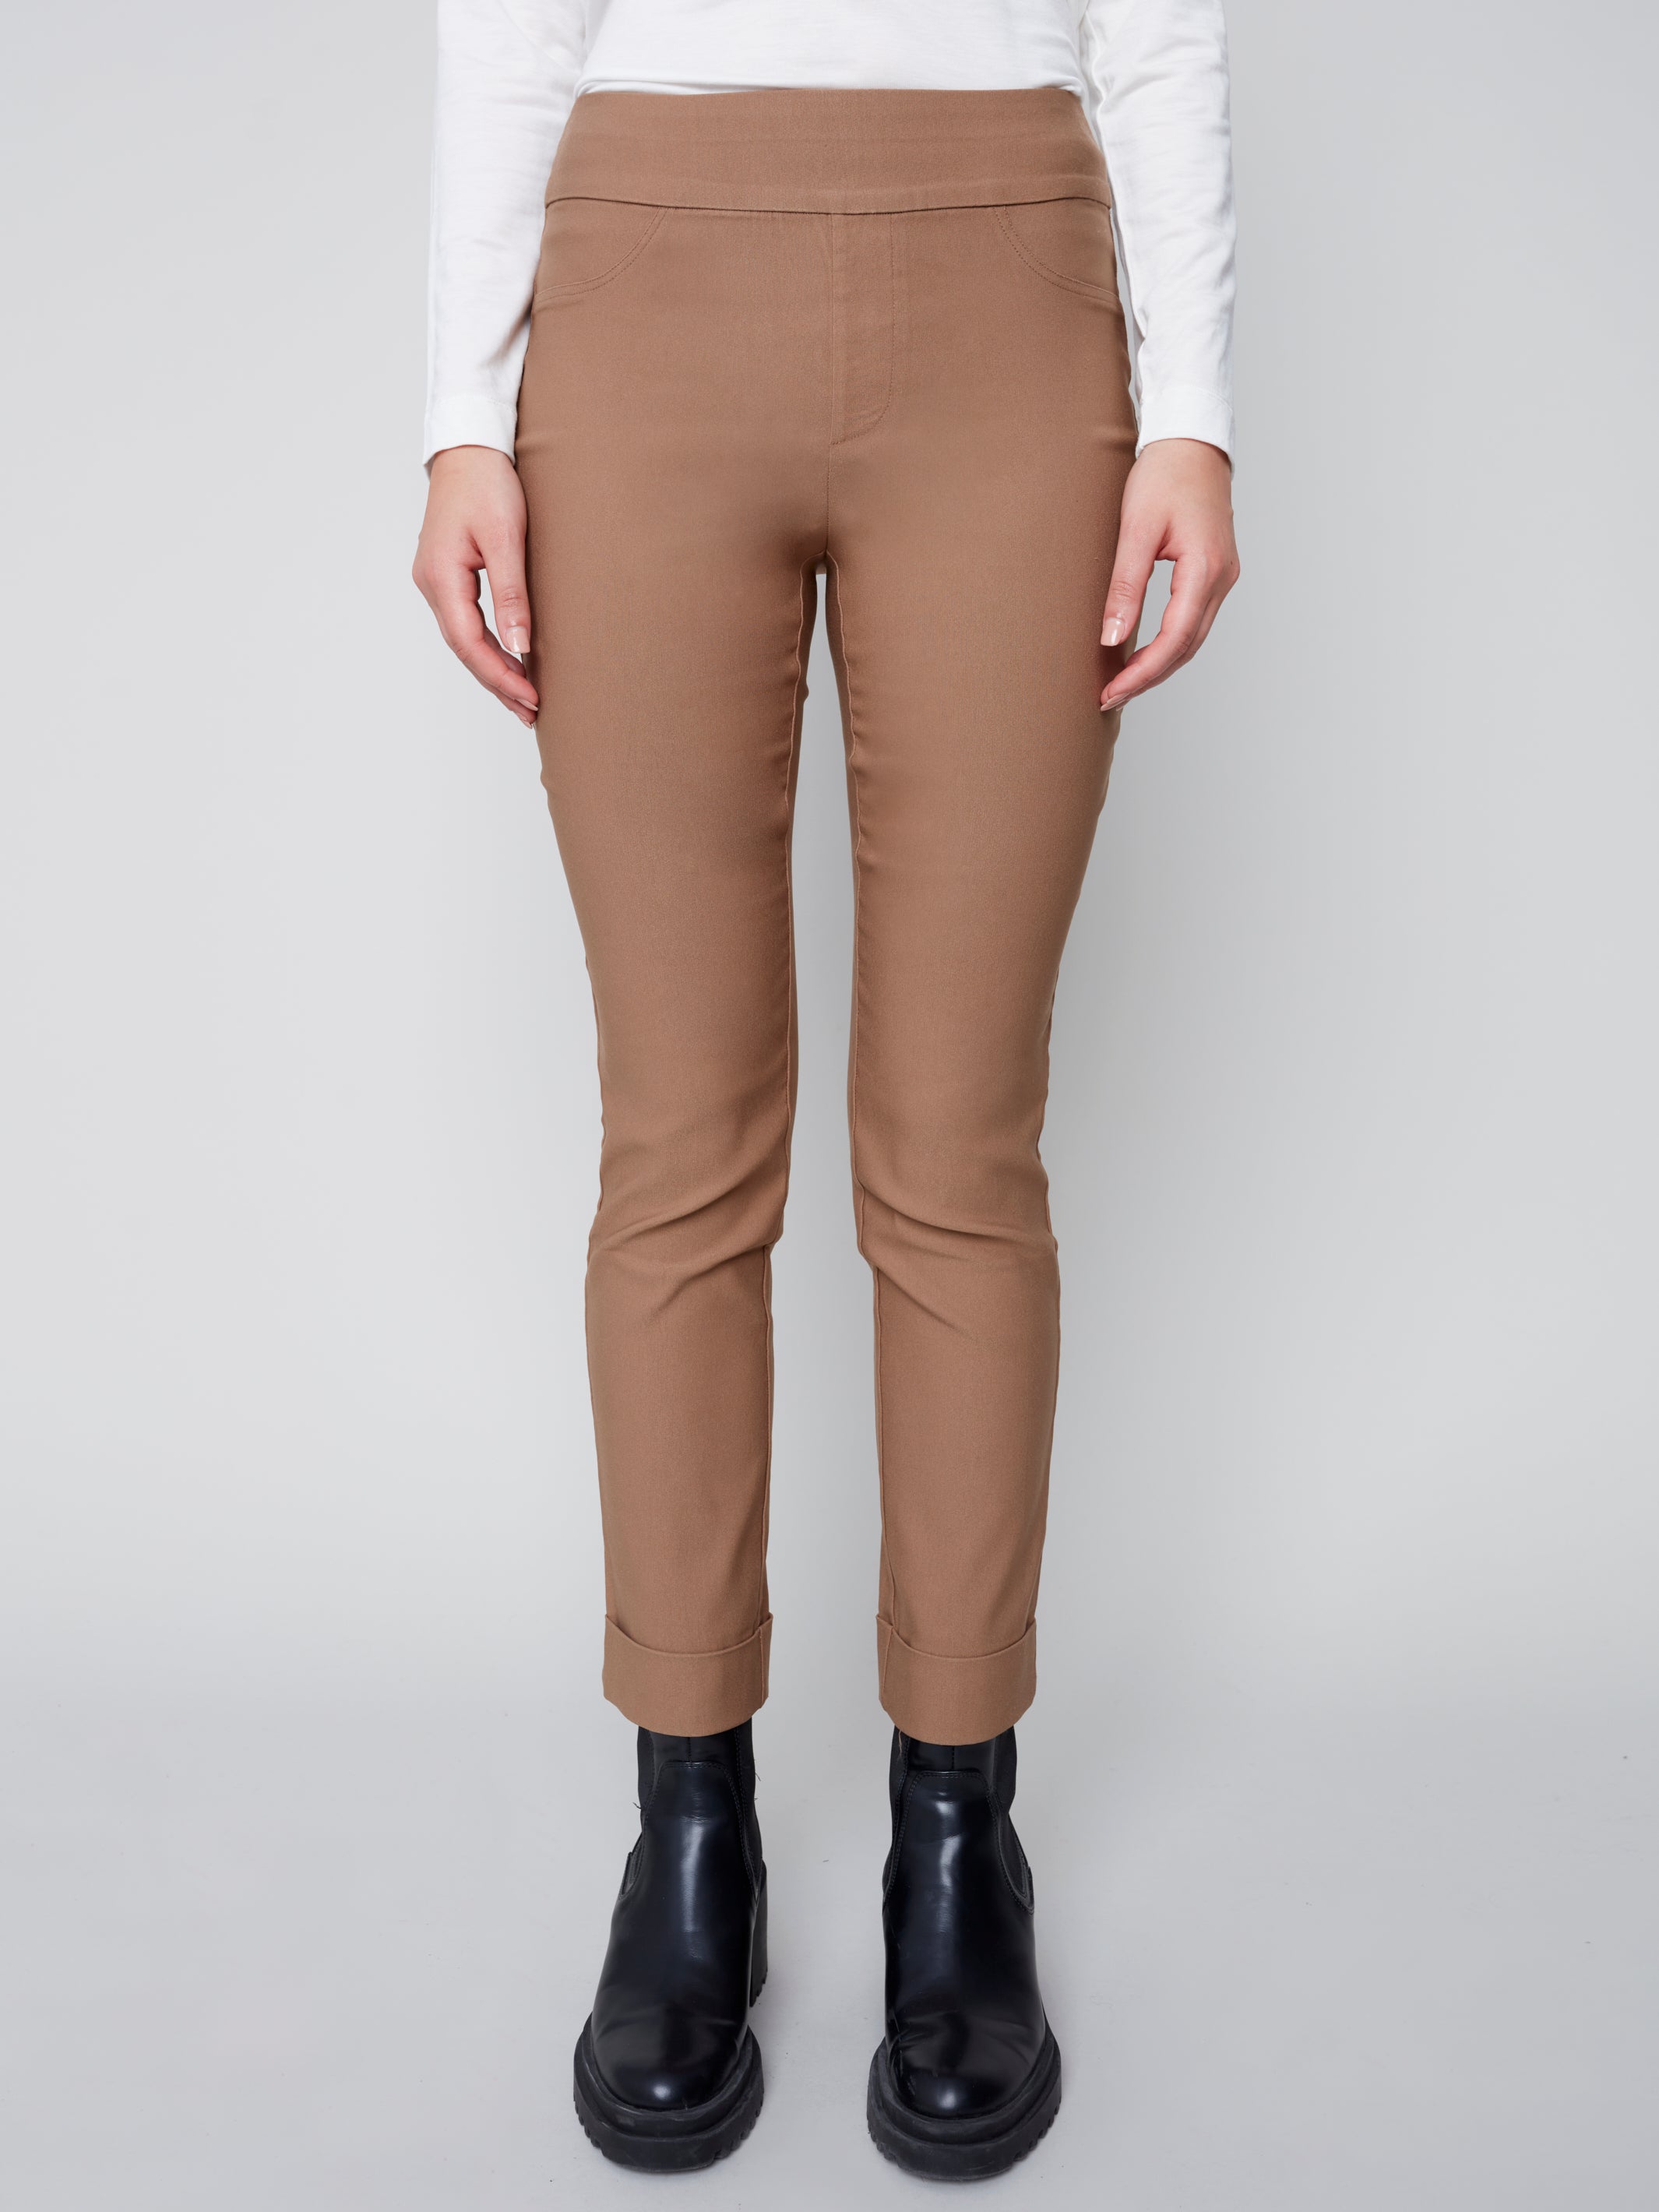 Charlie B Smooth Stretch Bengaline Pull-on Cuff Pant - Truffle